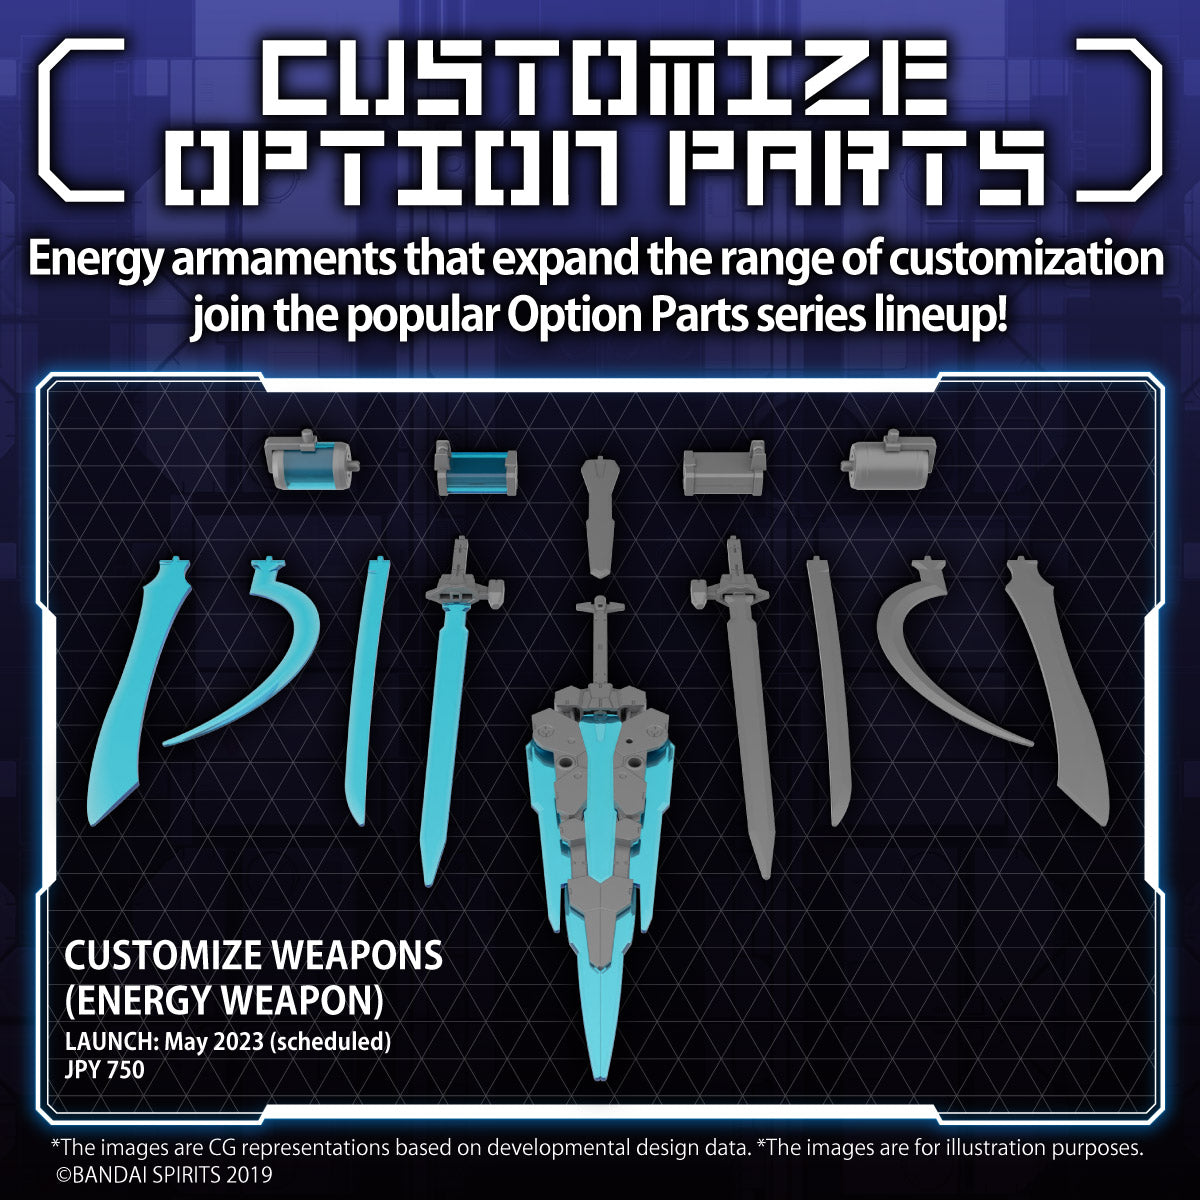 CUSTOMIZE WEAPONS (ENERGY WEAPON)